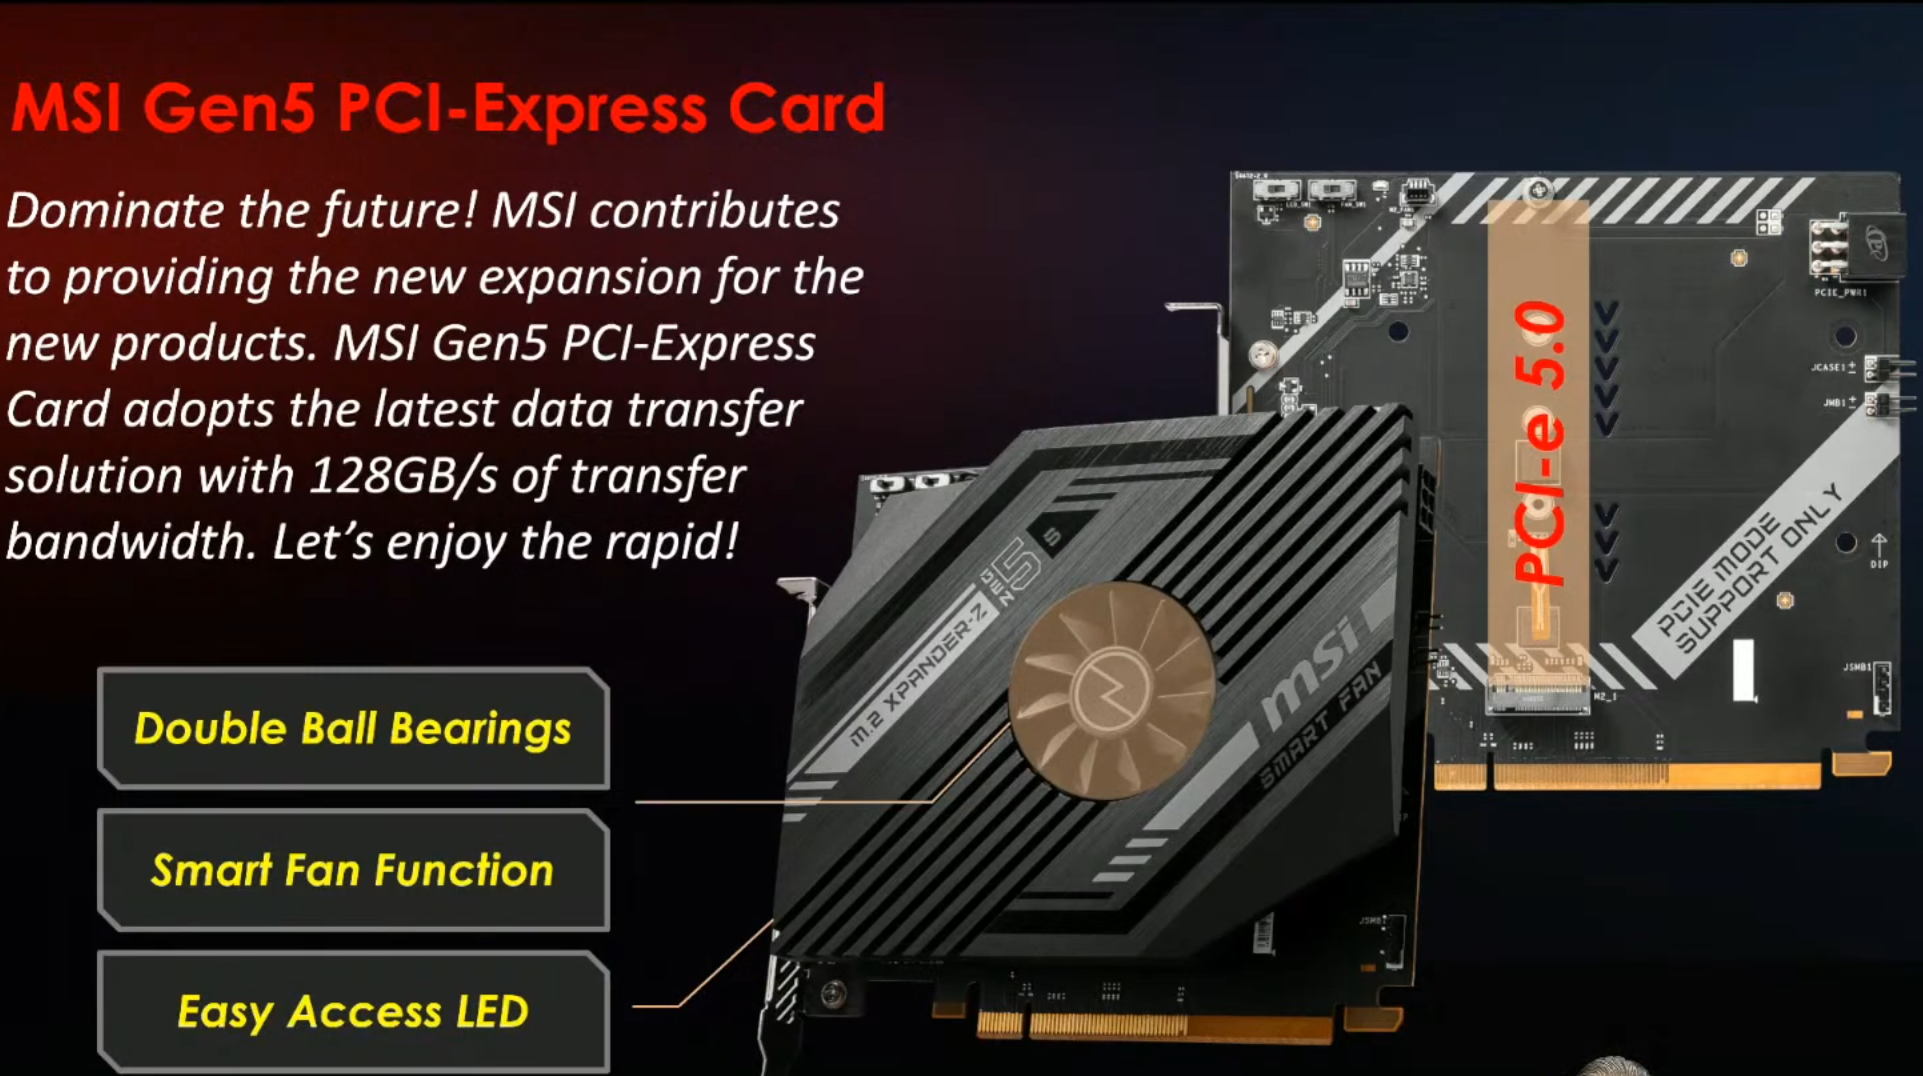 MSI Builds PCIe Gen 5 Card for Future NVMe SSDs